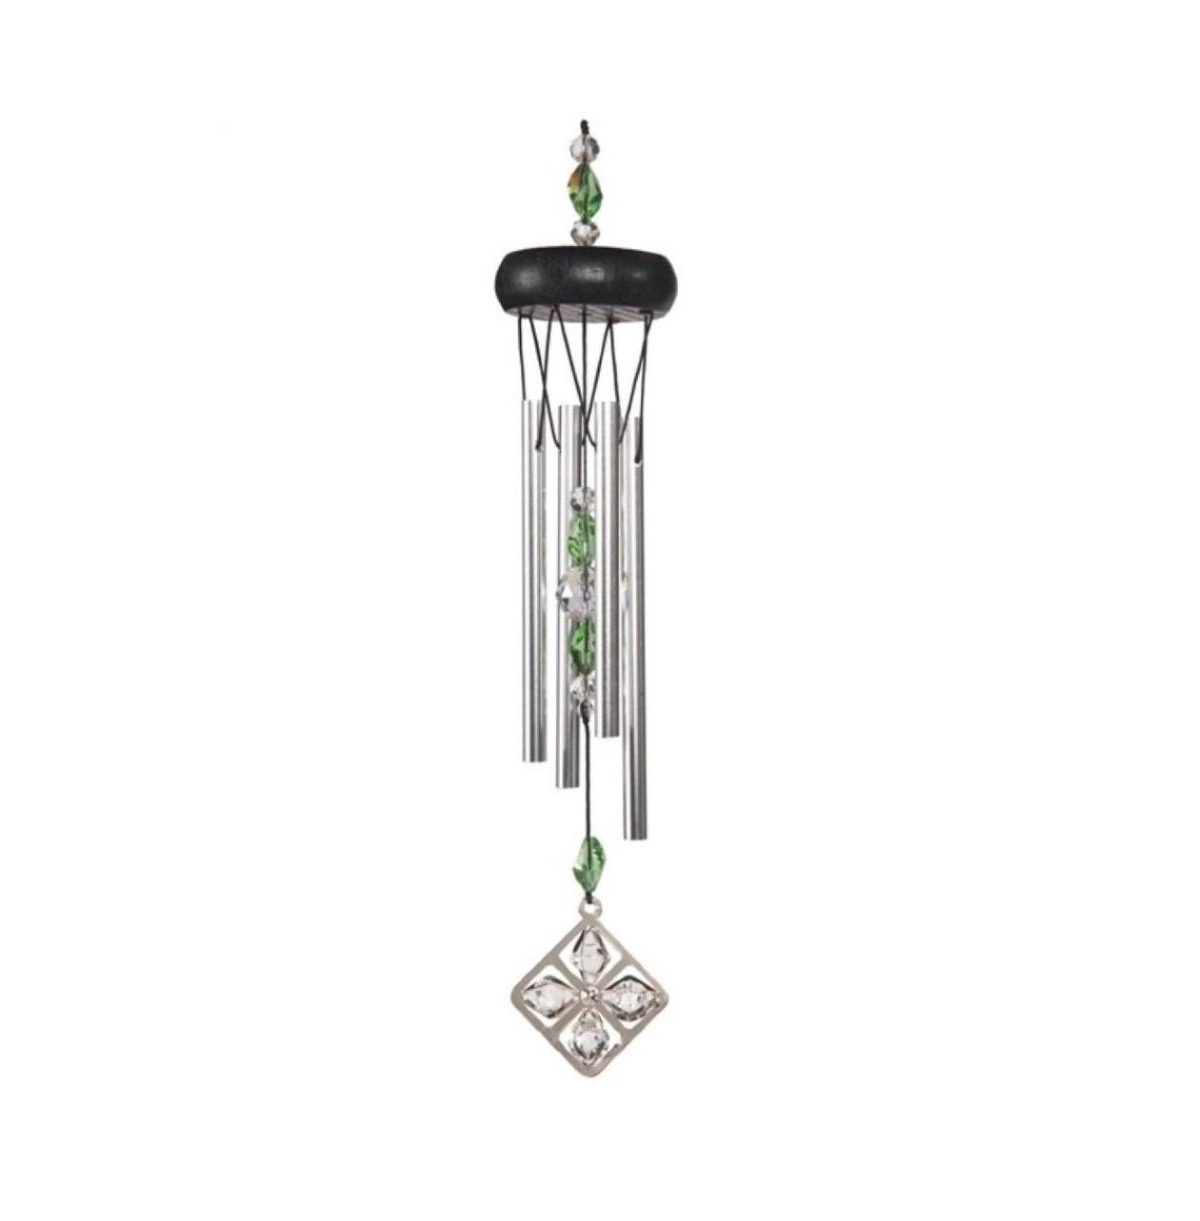 15" Long Green Wooden Top Gem Wind Chime Home Decor Perfect Gift for House Warming, Holidays and Birthdays - Green